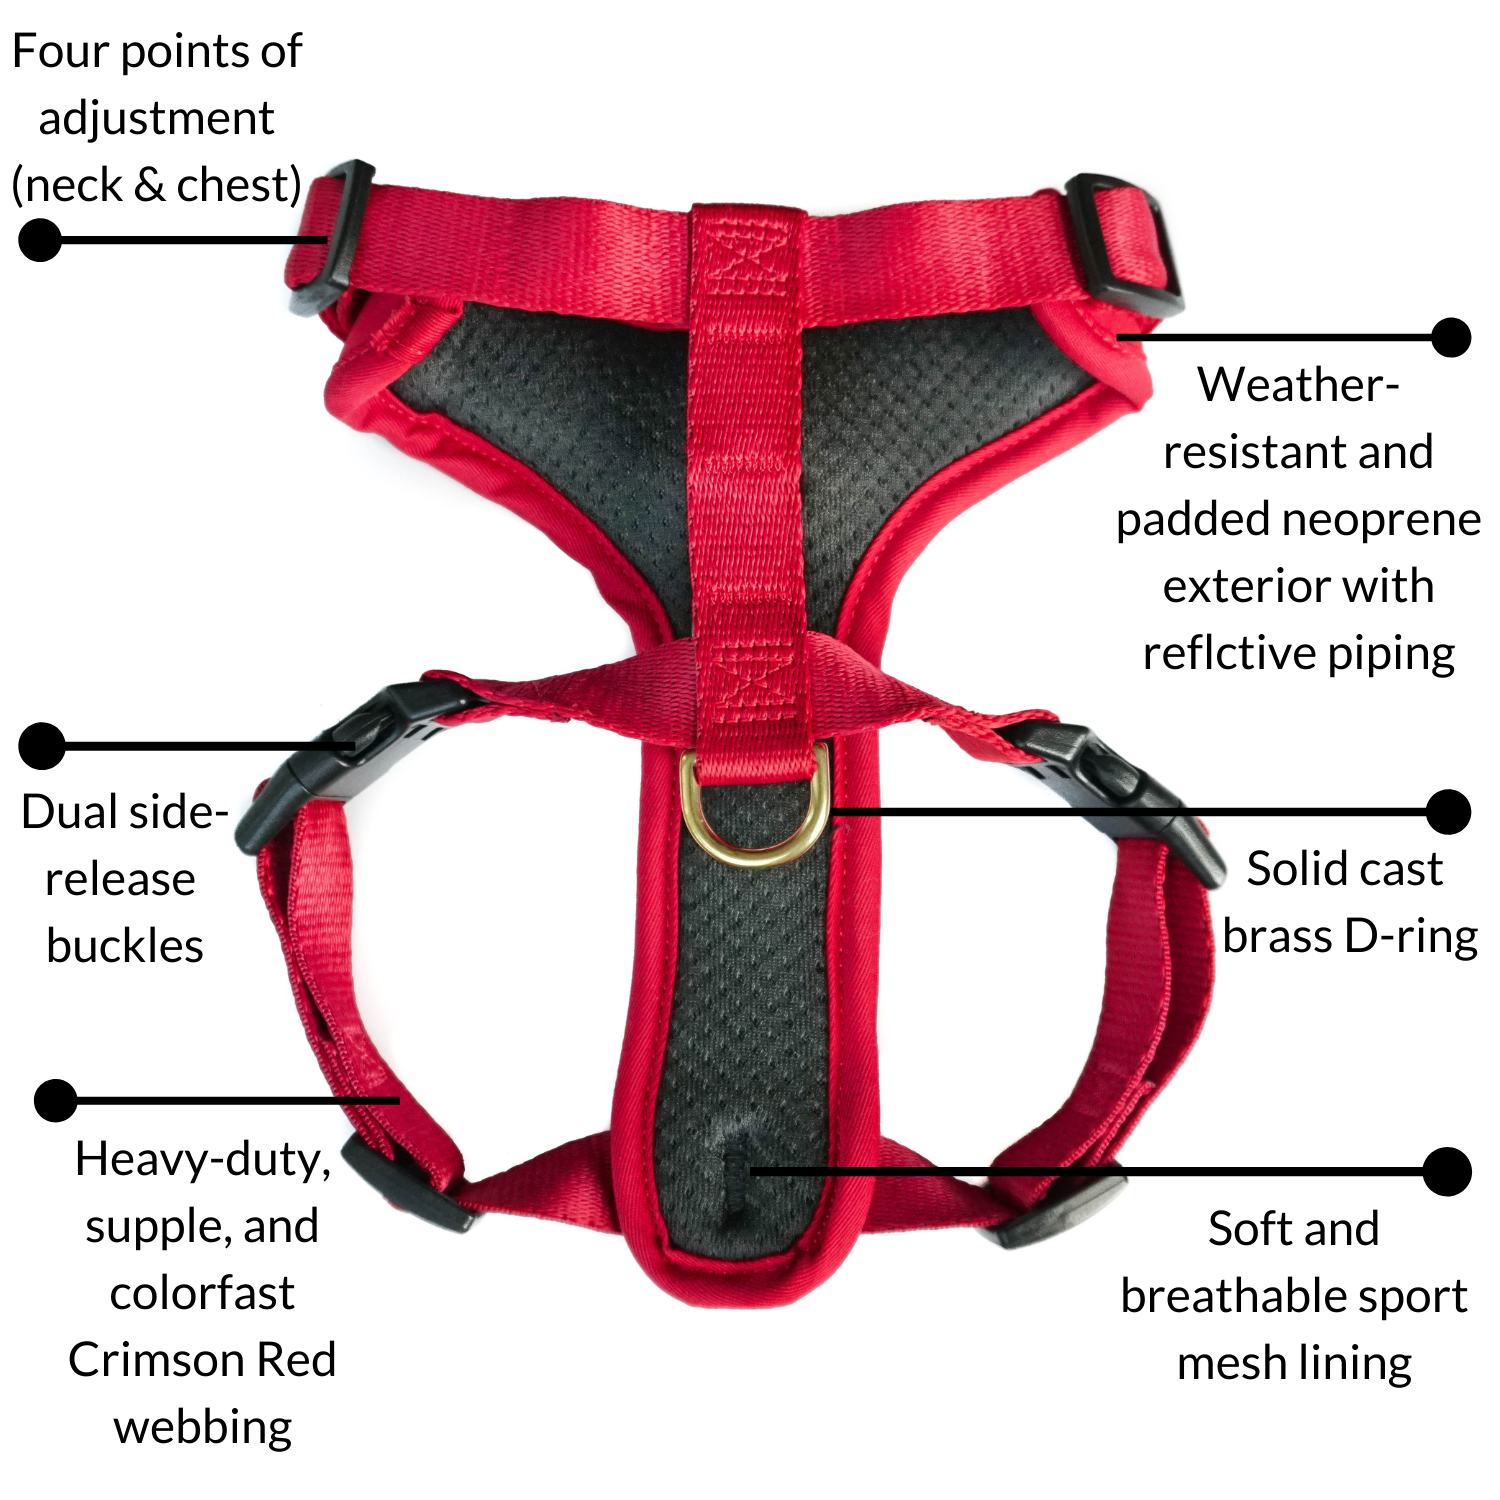 DJANGO's Adventure Cat Harness features a water-resistant and durable neoprene exterior, a lightweight and padded cat harness body, super soft custom webbing for max comfort, reflective piping for low light adventures, secure side release buckles for easy on and off, and a beautiful solid cast brass D-ring - djangobrand.com